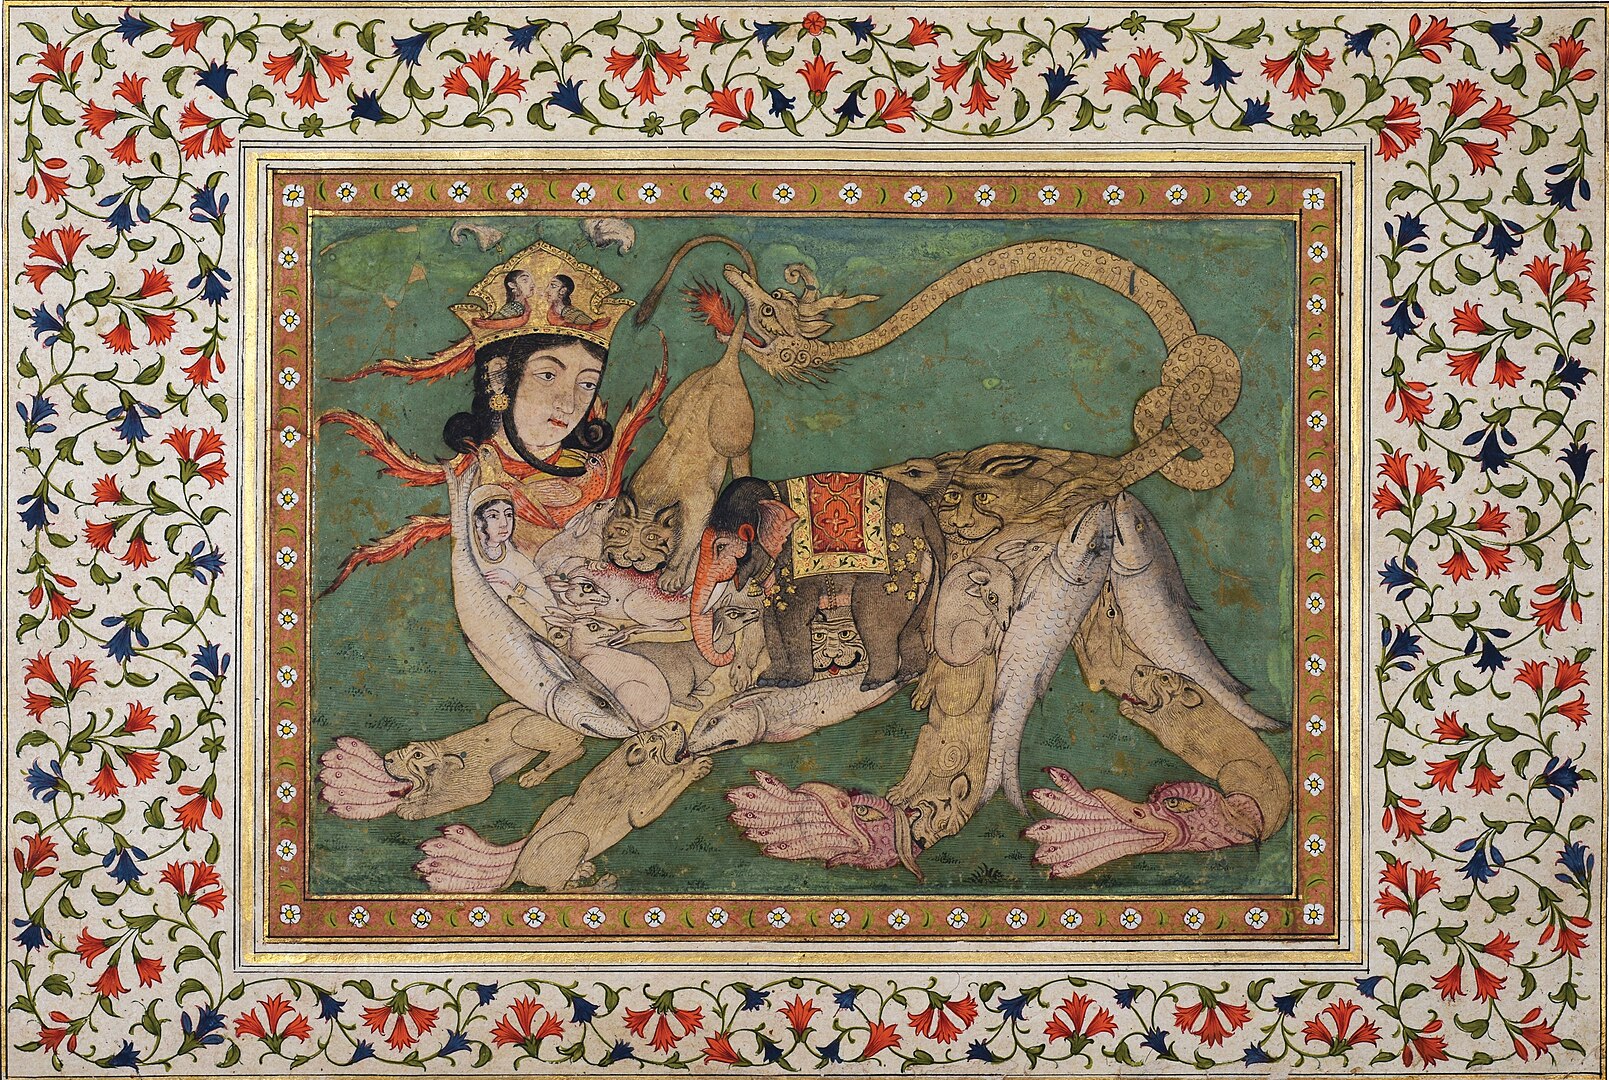 Framed with floral patterns, an image details the body of a sphinx with a messenger.